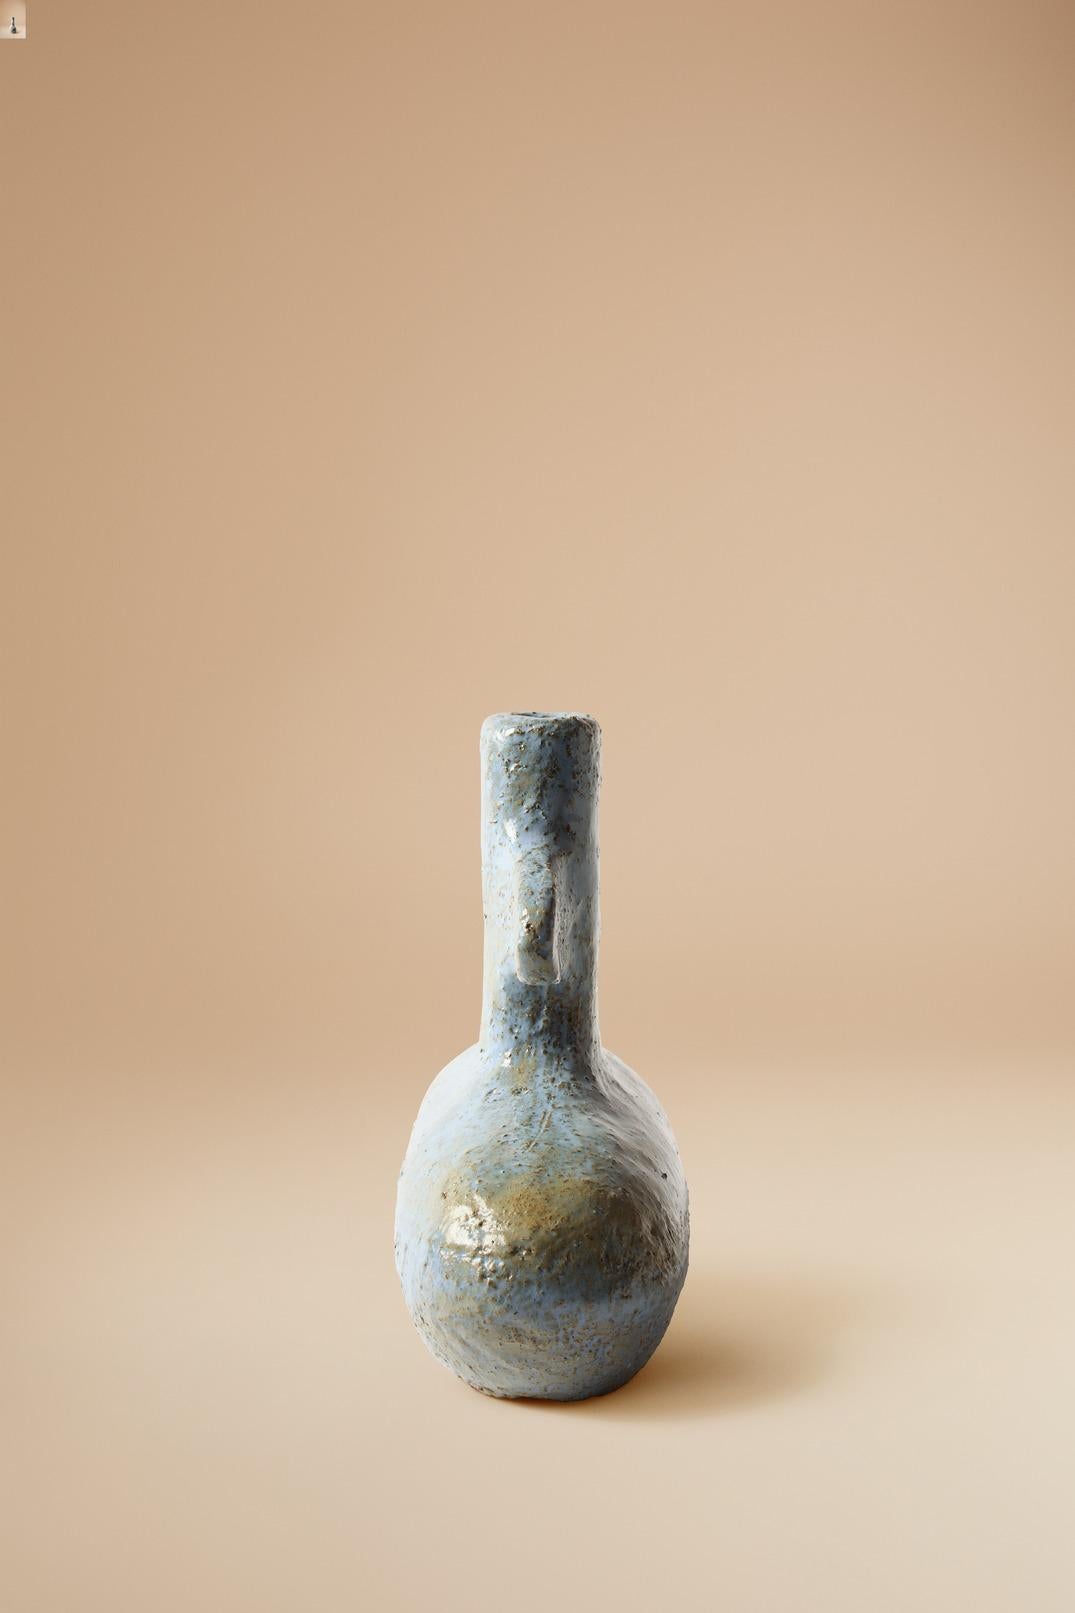 South African Vessel 04 in Textured Stoneware Clay. Handmade by Jade Paton for Lemon For Sale